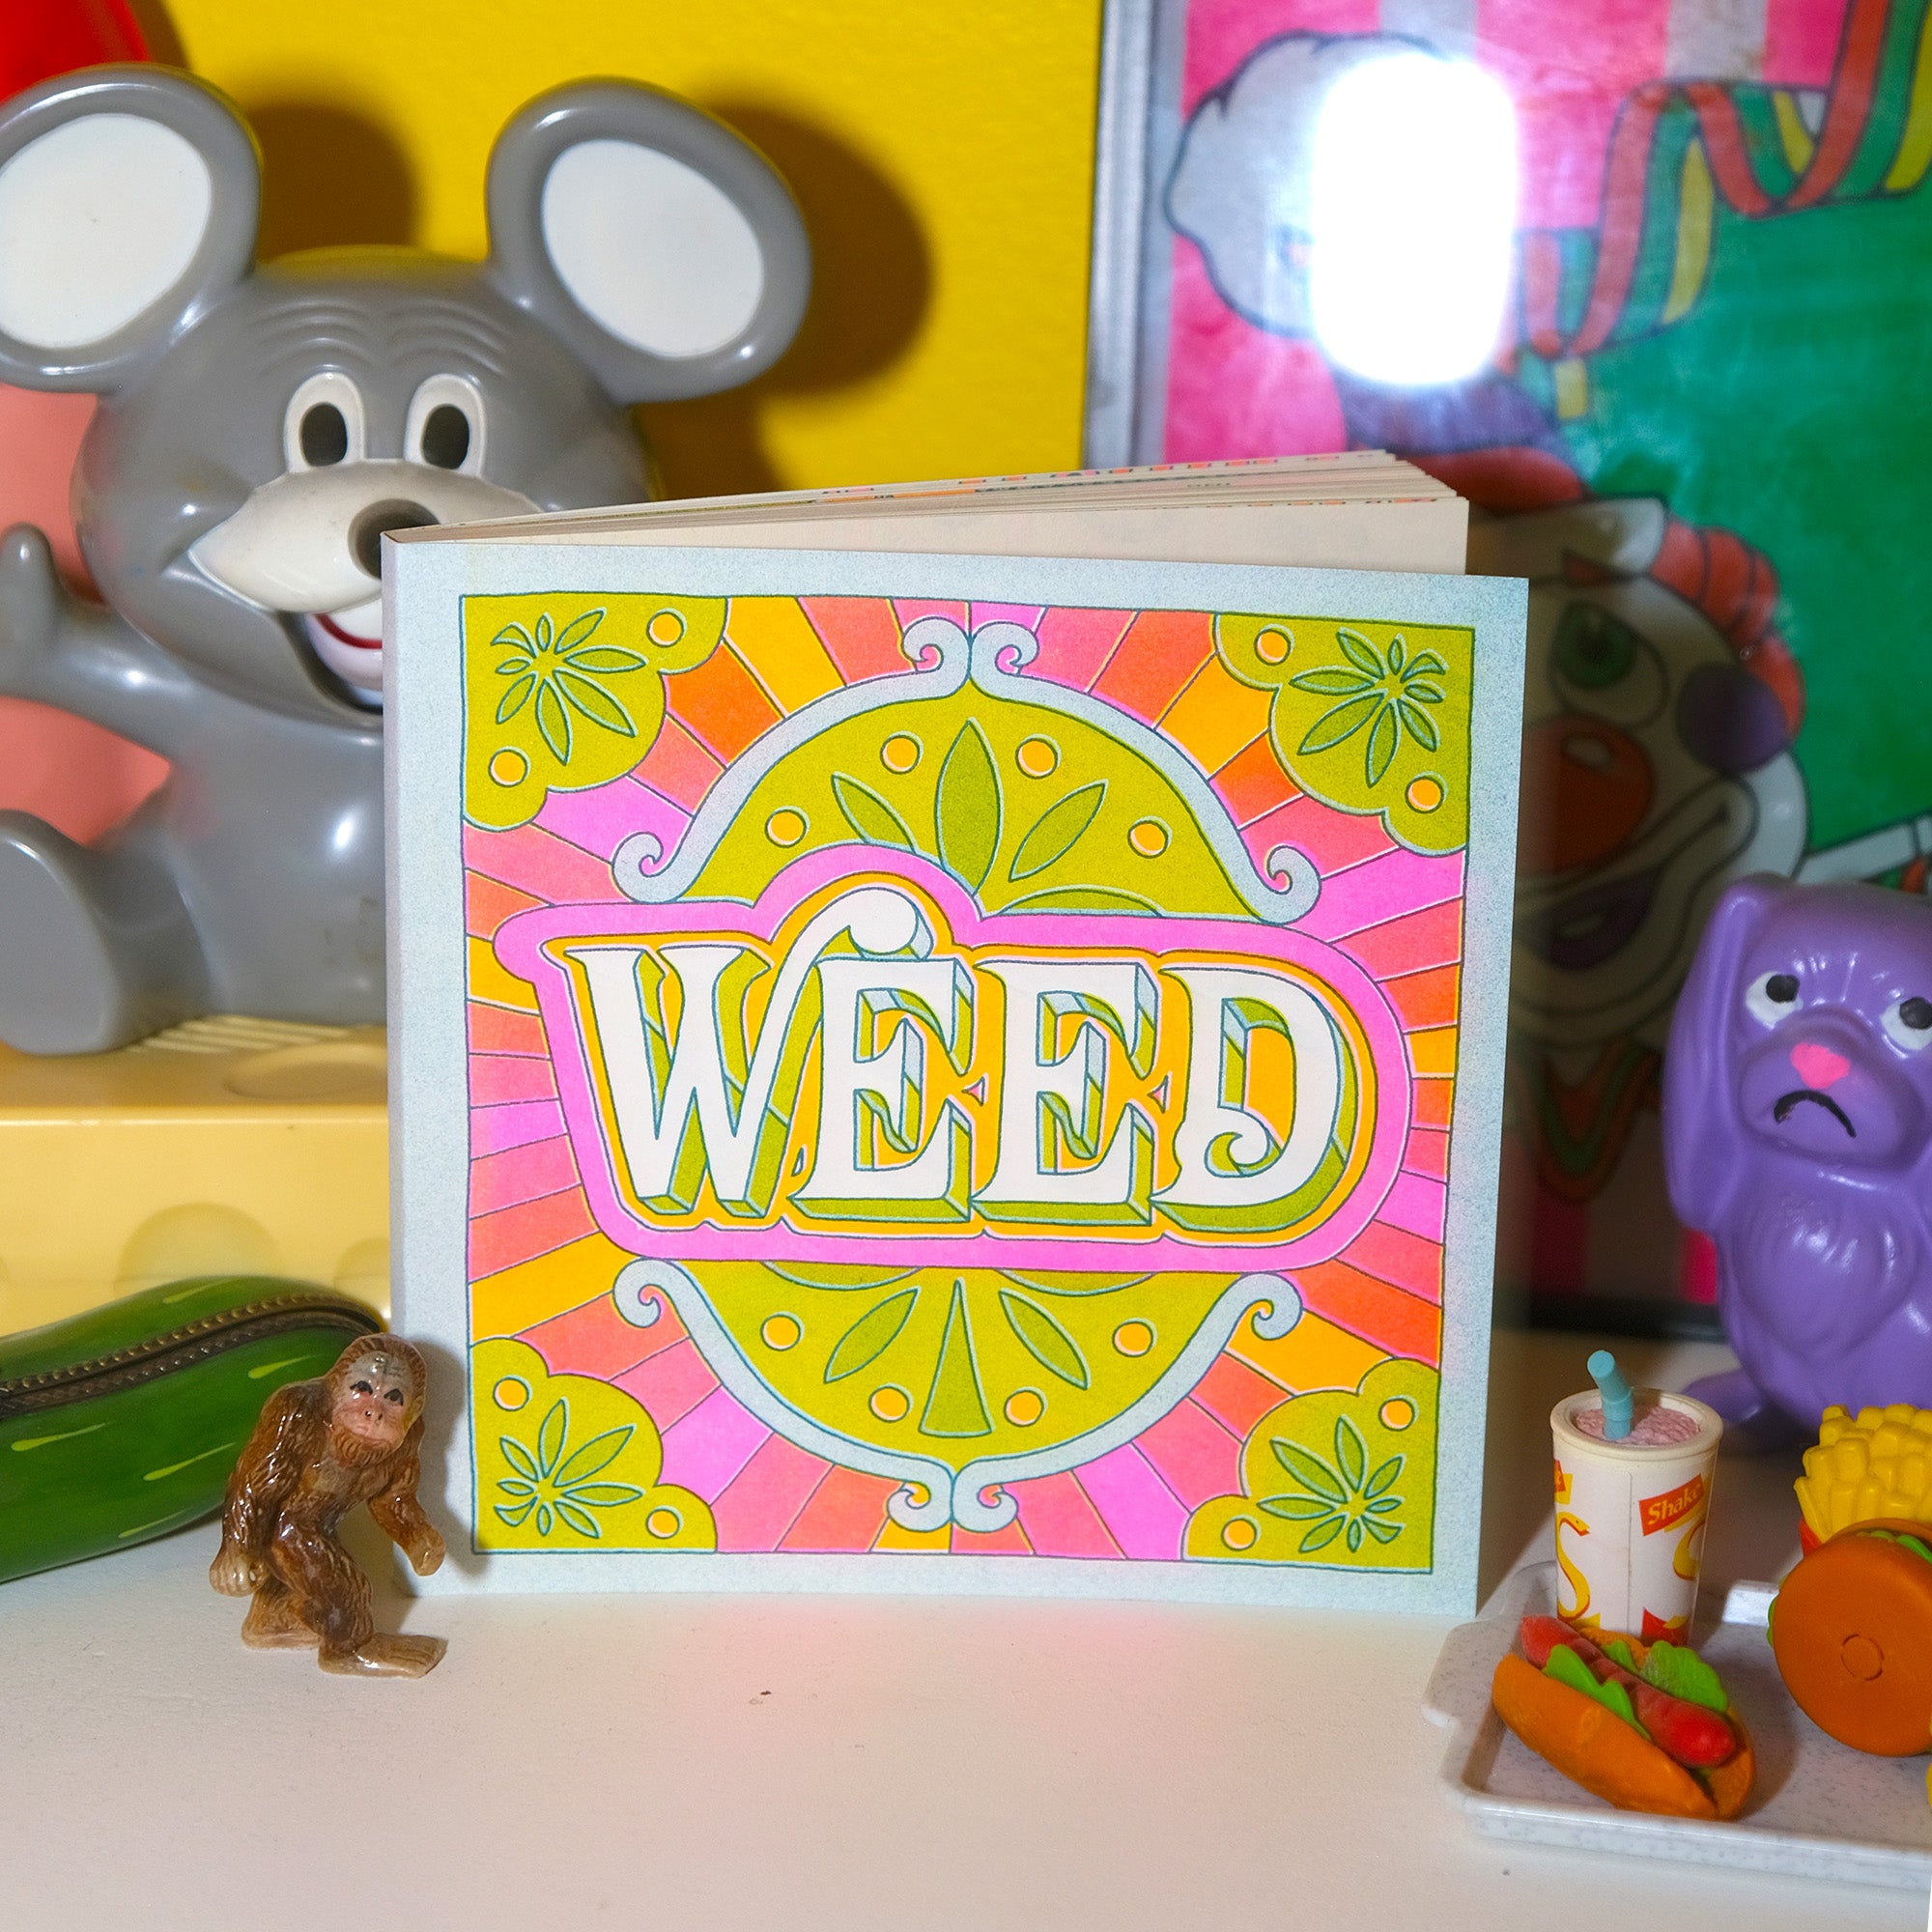 A Simple Guide to Weed Book (PREORDER)